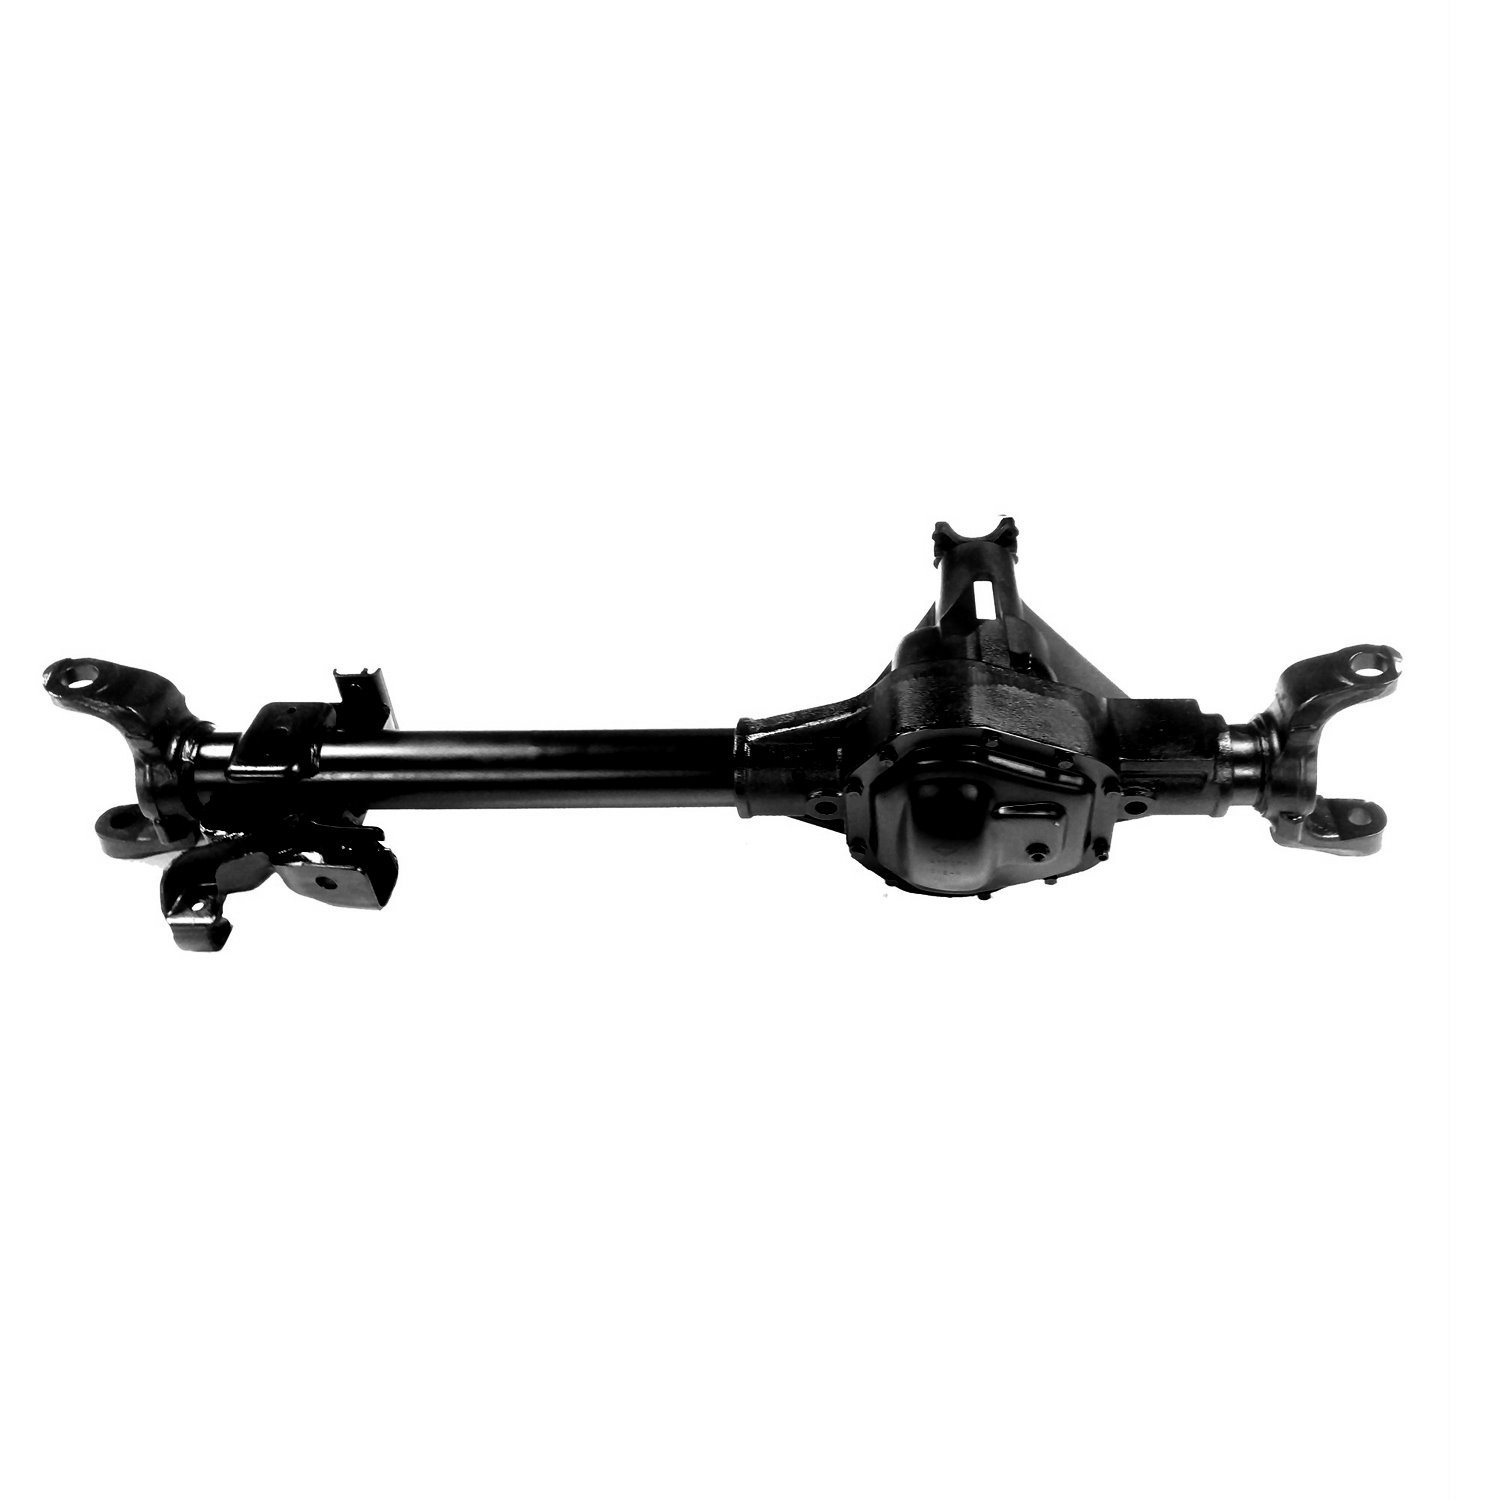 Remanufactured Complete Axle Assembly for Dana 60 01-04 F350 3.73 , DRW with 4 Wheel ABS